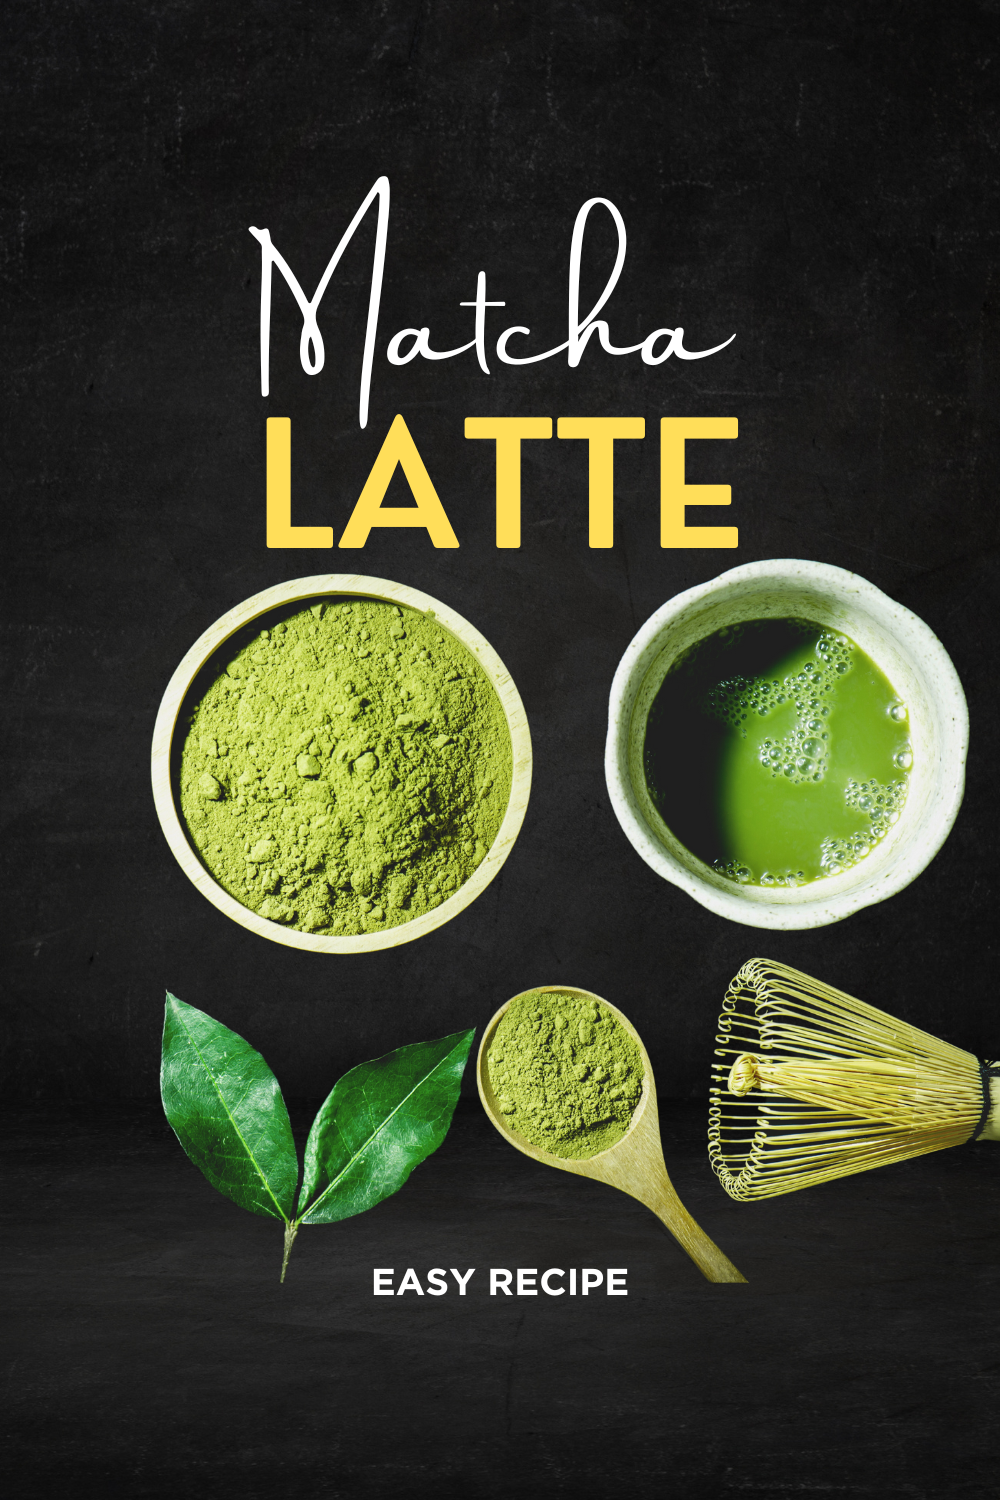 A bowl of matcha powder set beside a cup of a matcha infused beverage.